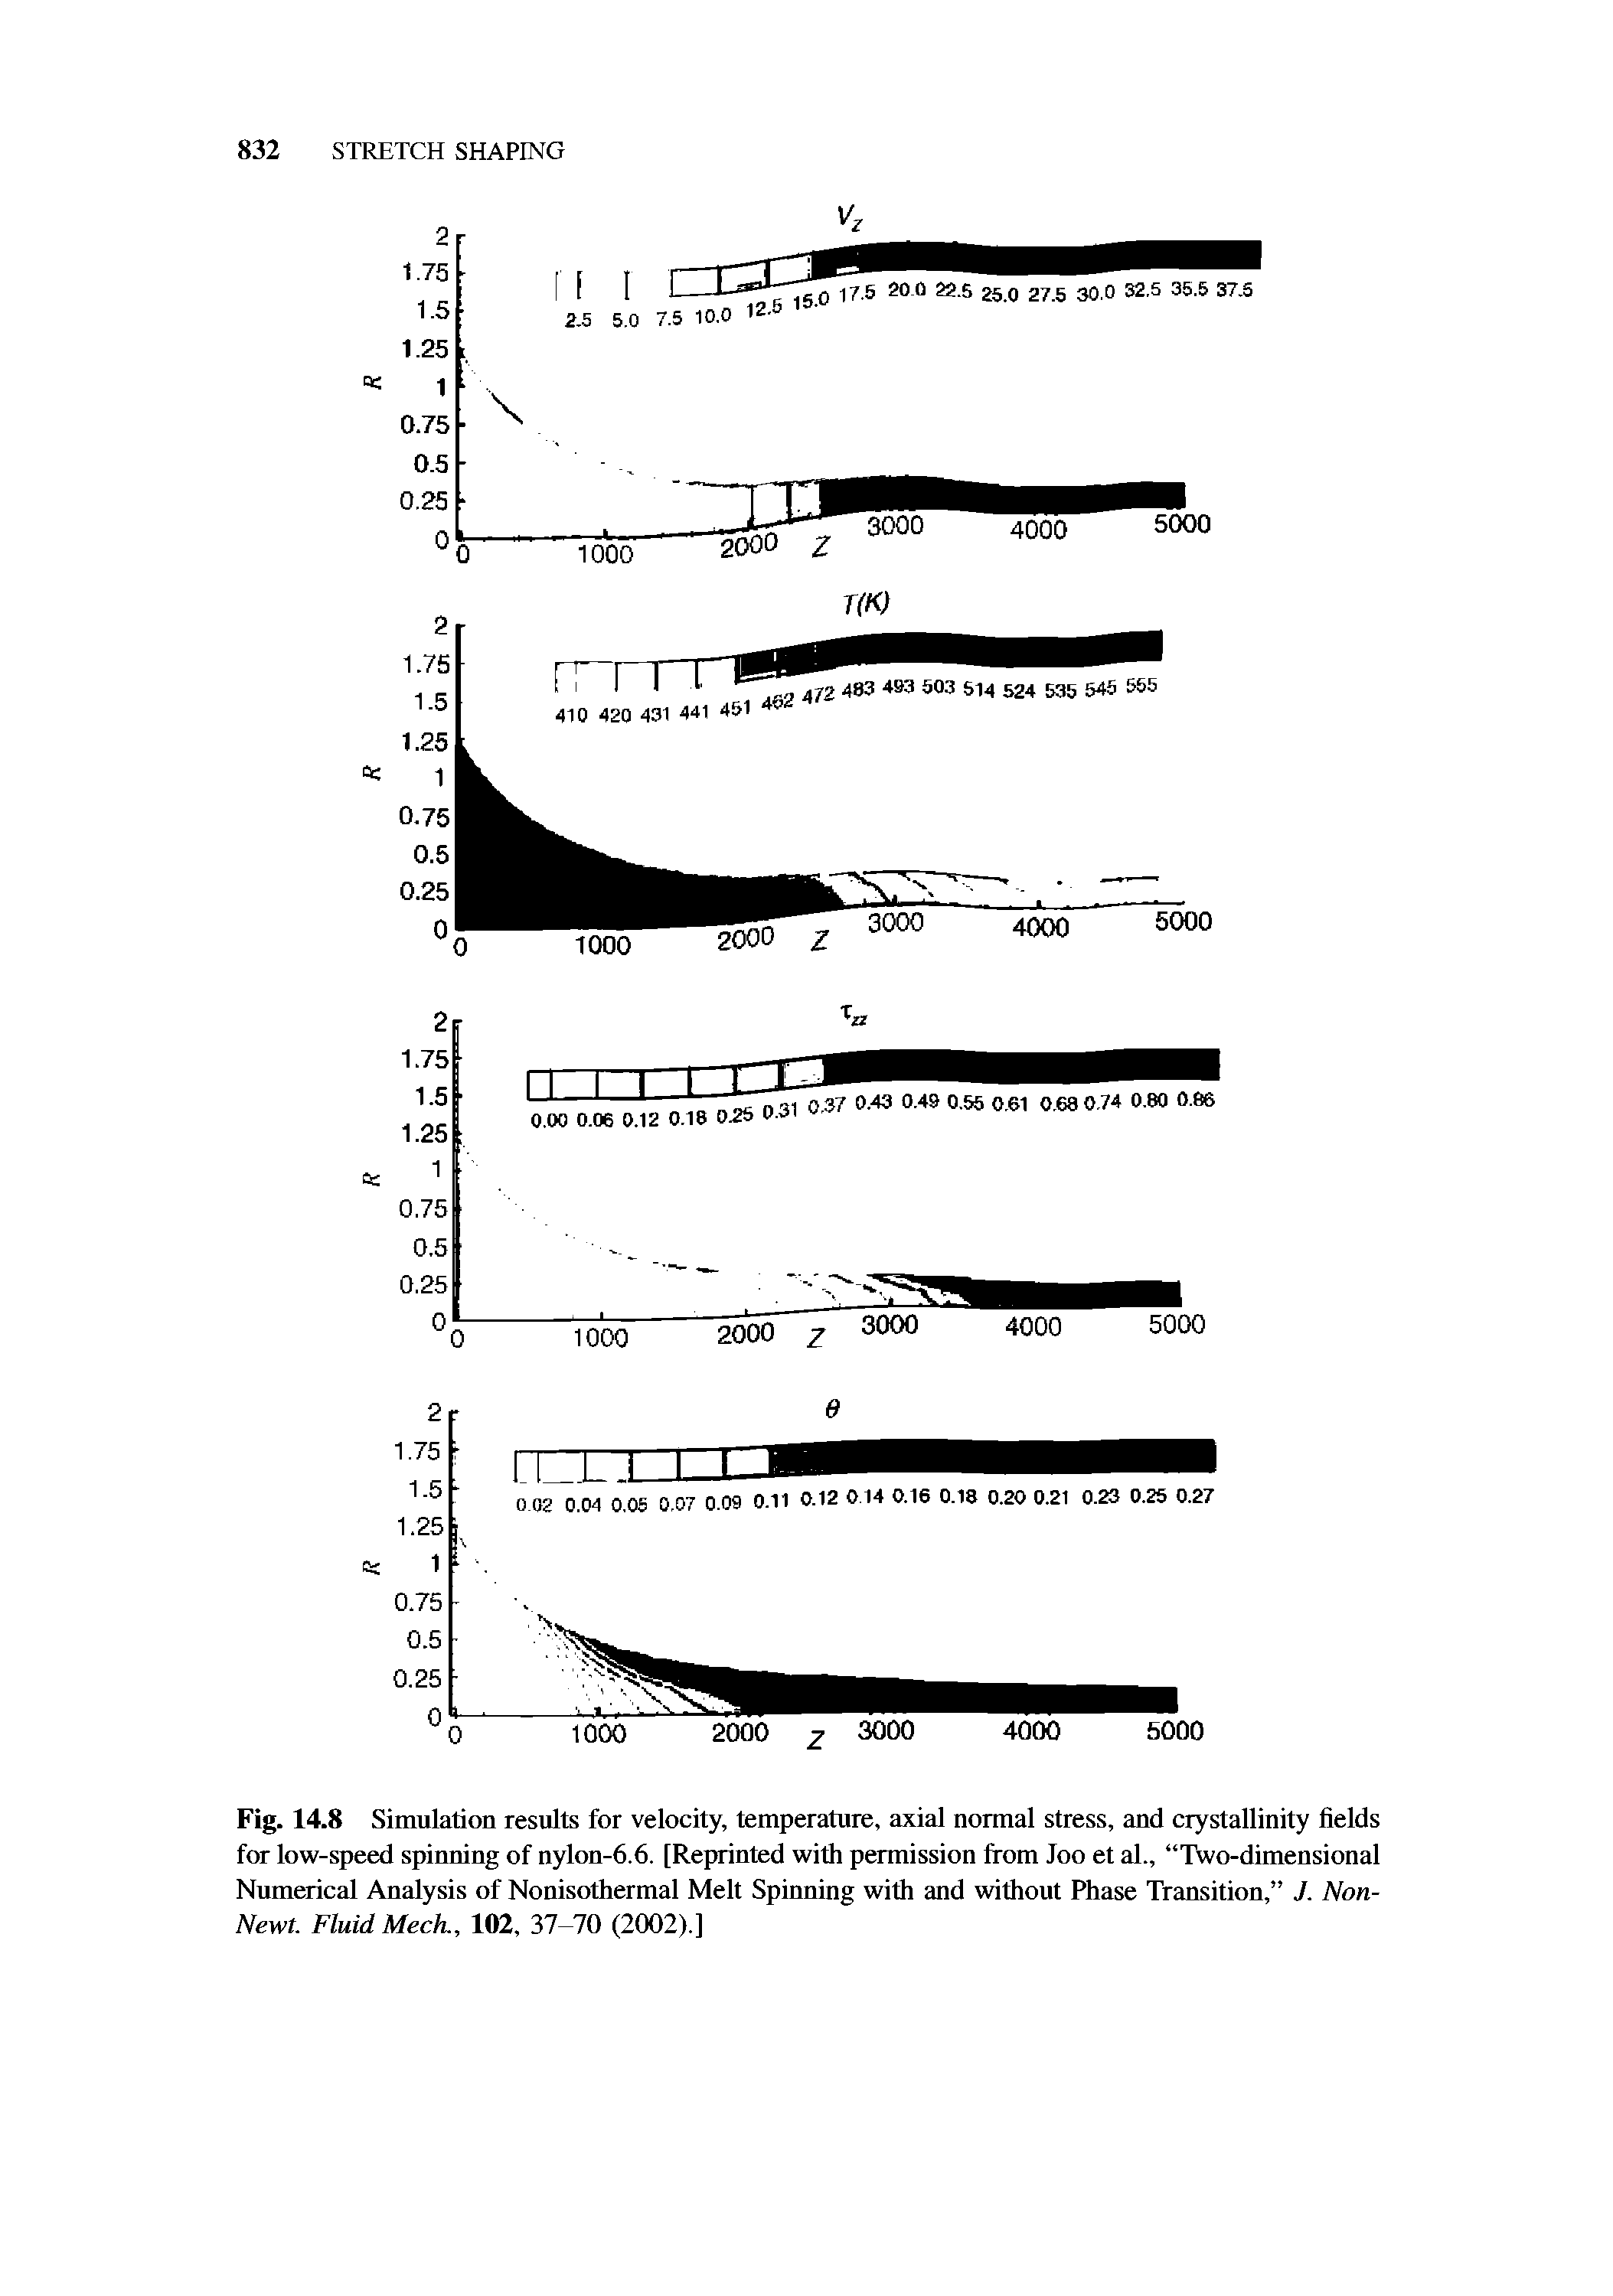 Fig. 14.8 Simulation results for velocity, temperature, axial normal stress, and crystallinity fields for low-speed spinning of nylon-6.6. [Reprinted with permission from Joo et al., Two-dimensional Numerical Analysis of Nonisothermal Melt Spinning with and without Phase Transition, J. Non-Newt. Fluid Mech., 102, 37-70 (2002).]...